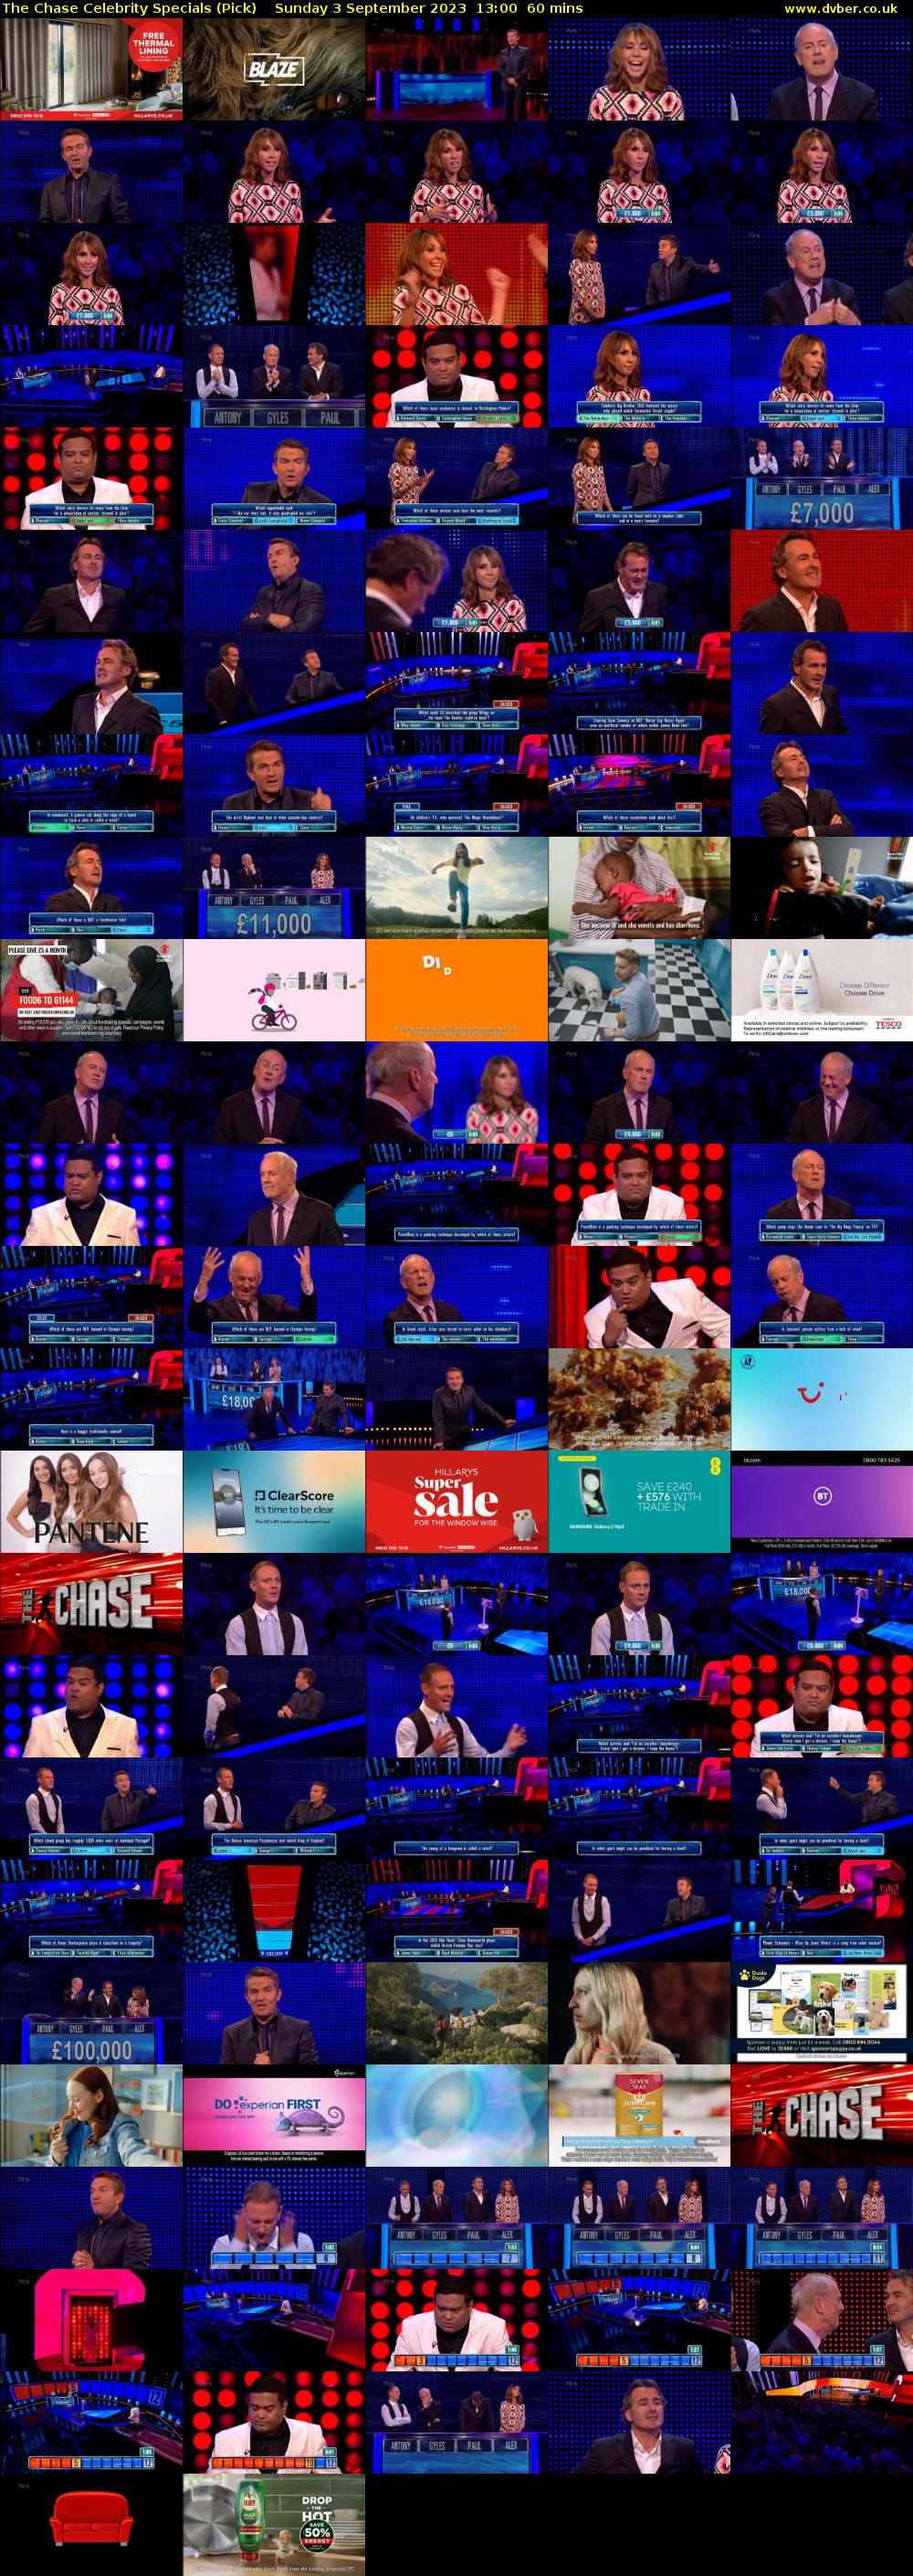 The Chase Celebrity Specials (Pick) Sunday 3 September 2023 13:00 - 14:00